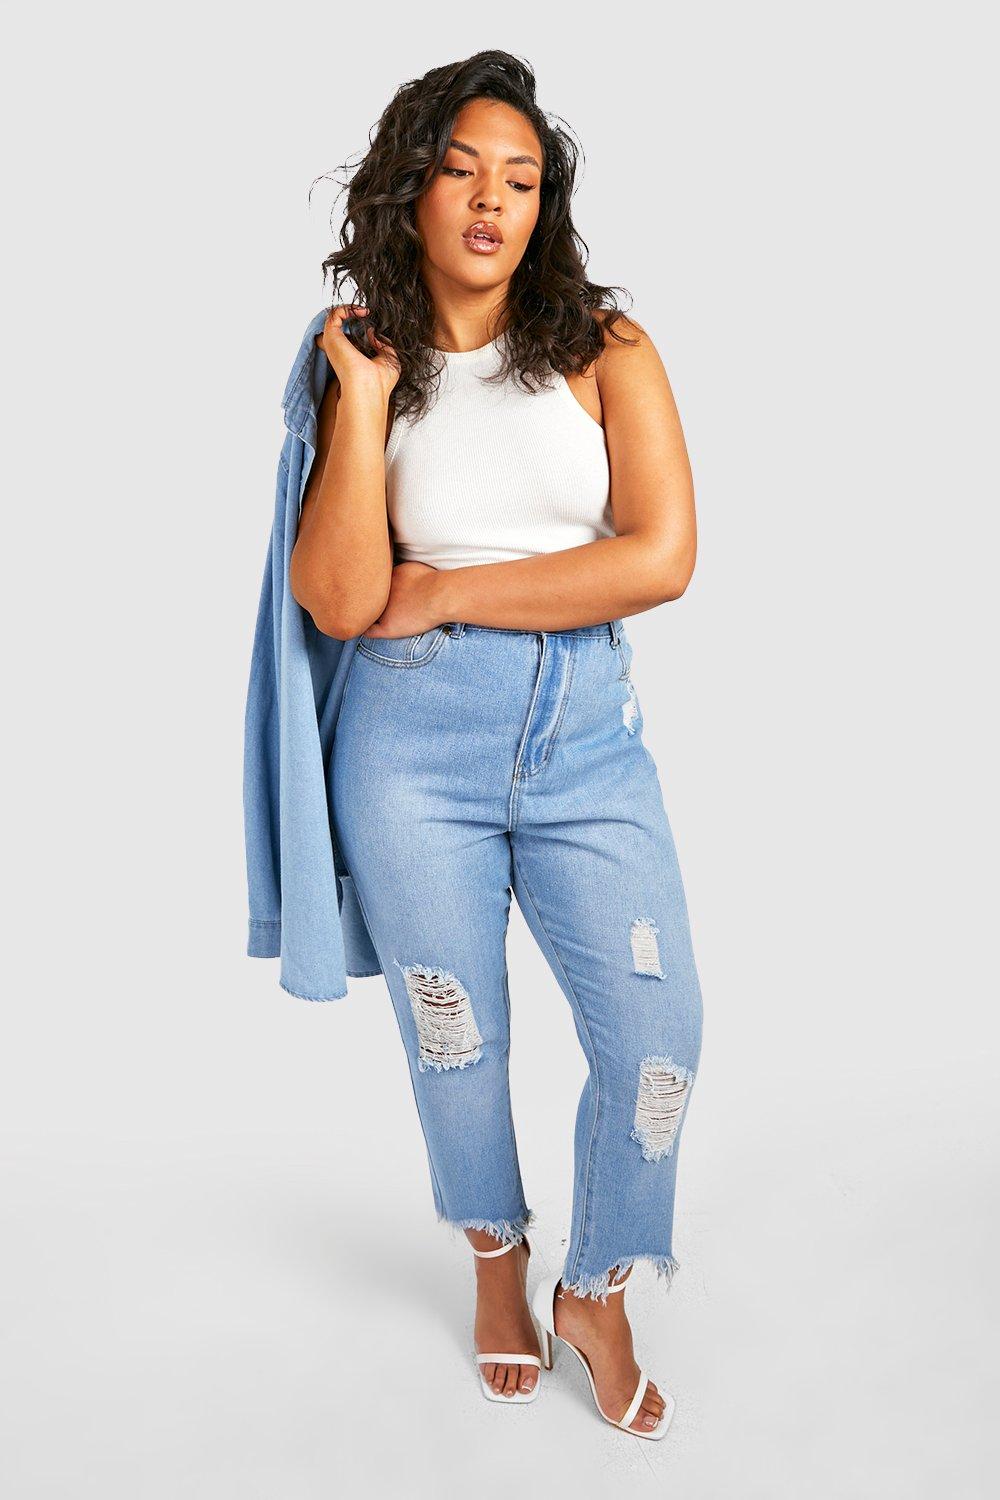 boohoo Plus Size Ripped Distressed High Waisted Mom Jeans - Blue - Size 14